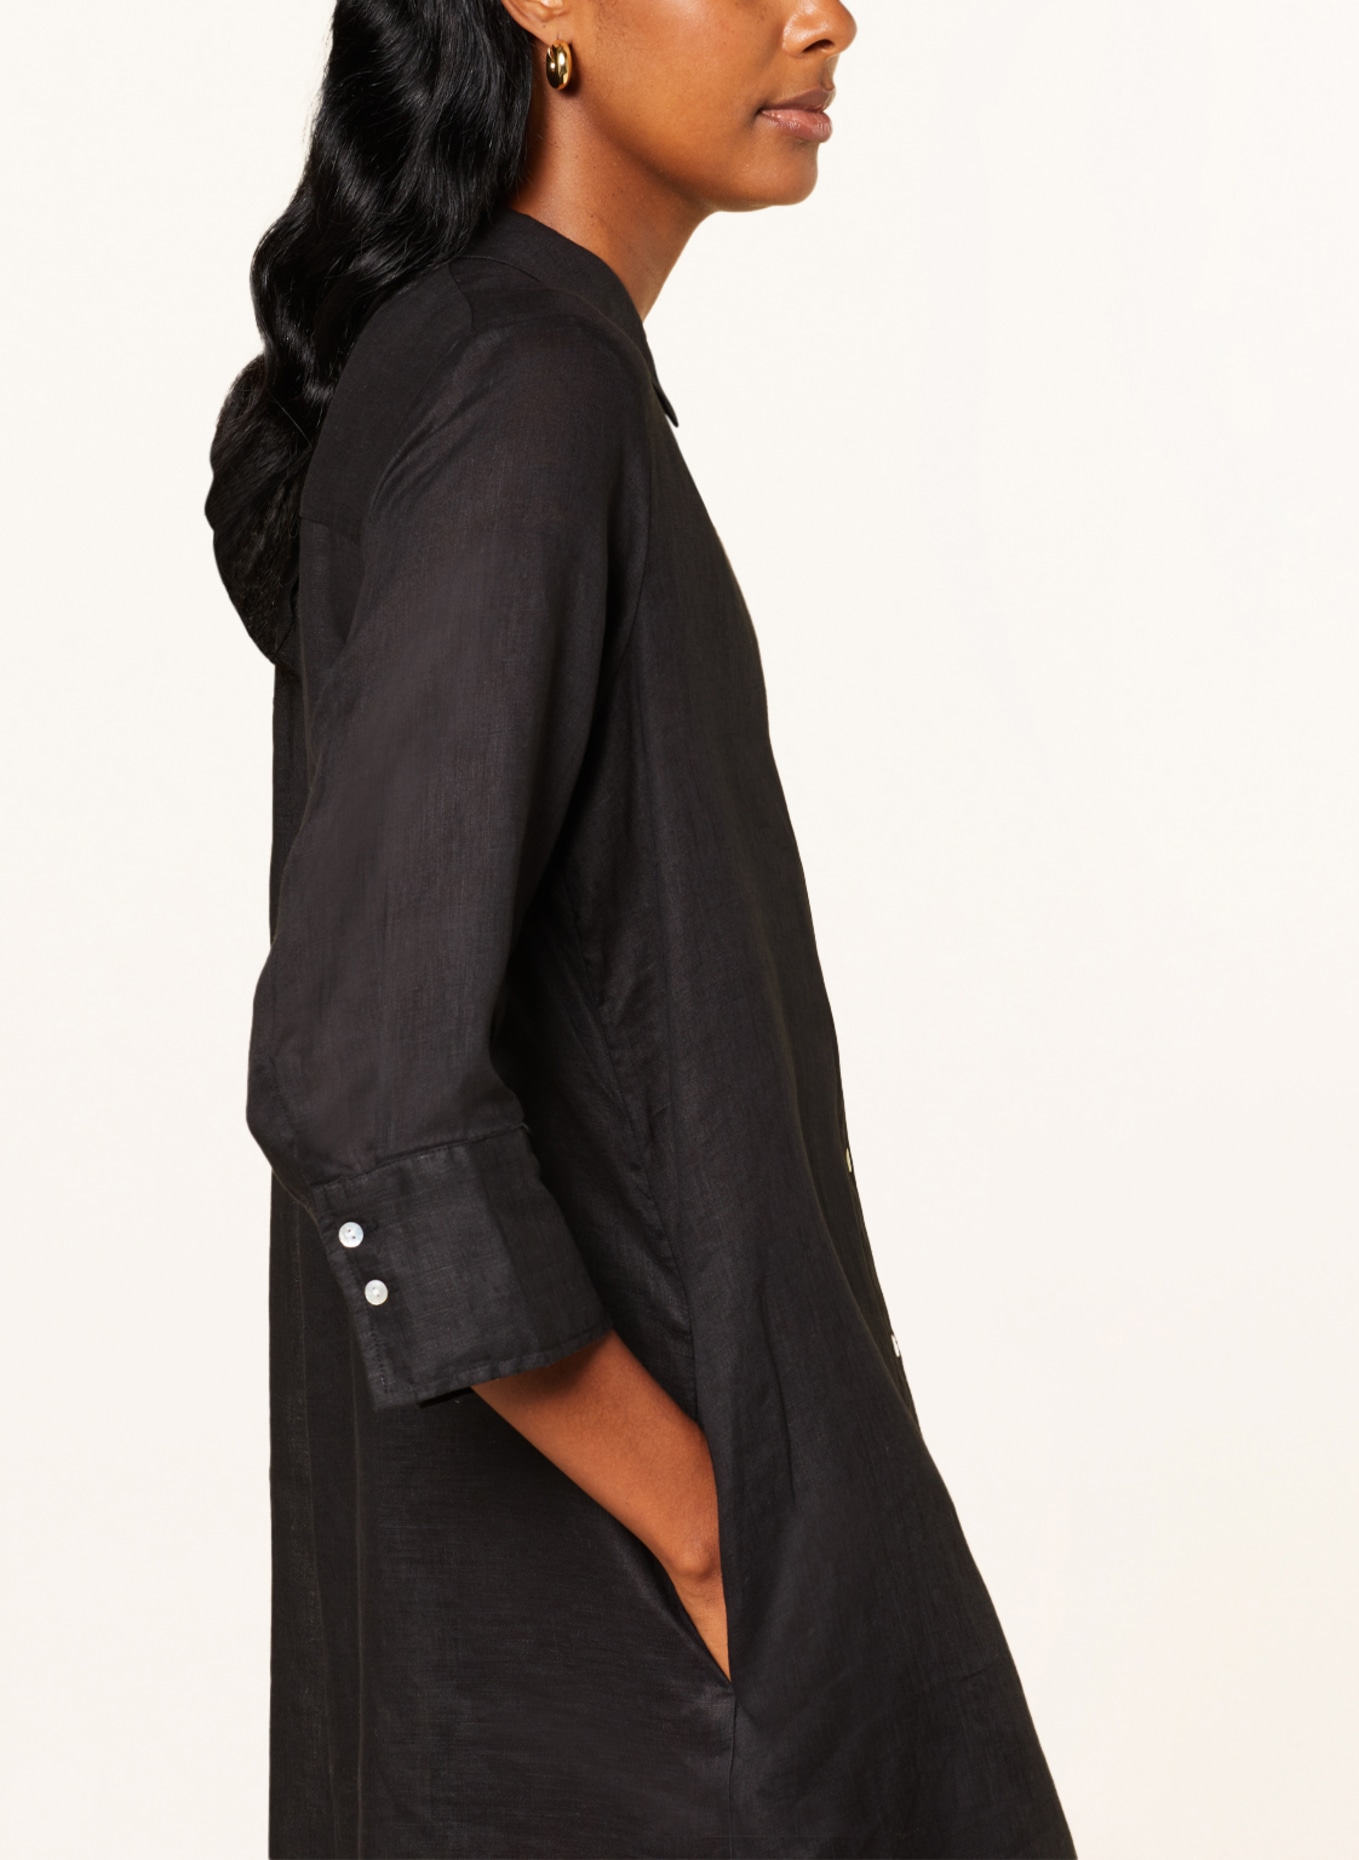 (THE MERCER) N.Y. Shirt dress made of linen with 3/4 sleeves, Color: BLACK (Image 4)